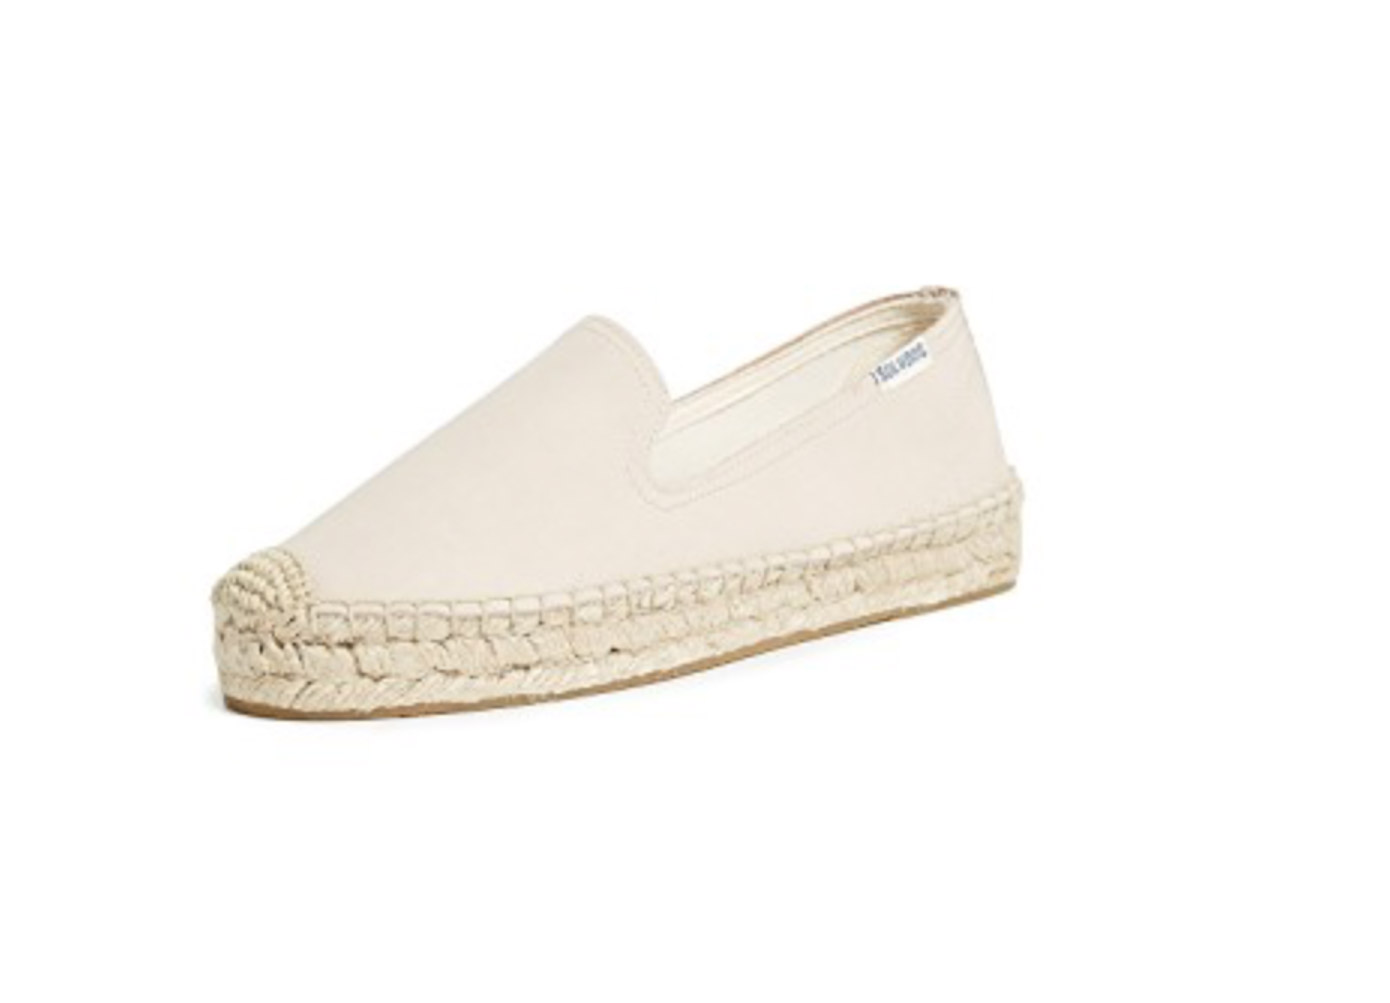 Laura Leigh of Louella Reese shares her favorite summer purchases of summer 2018 including these must have Espadrille Smoking Loafers from Soludos